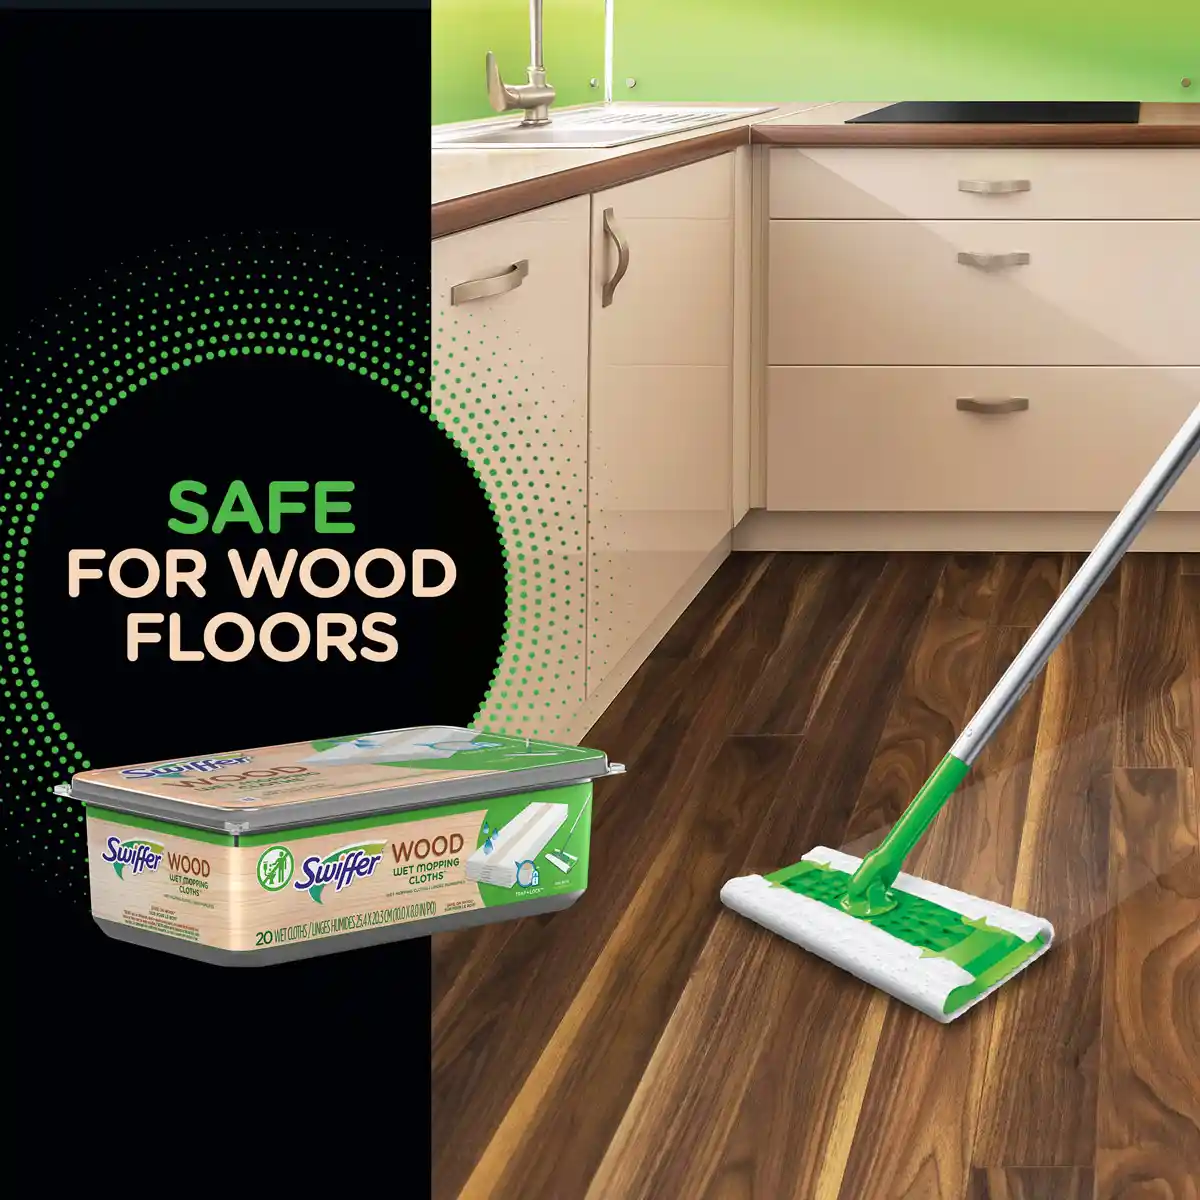 Almost Effortless Wood Floor Cleaning with The Swiffer WetJet Wood Mop